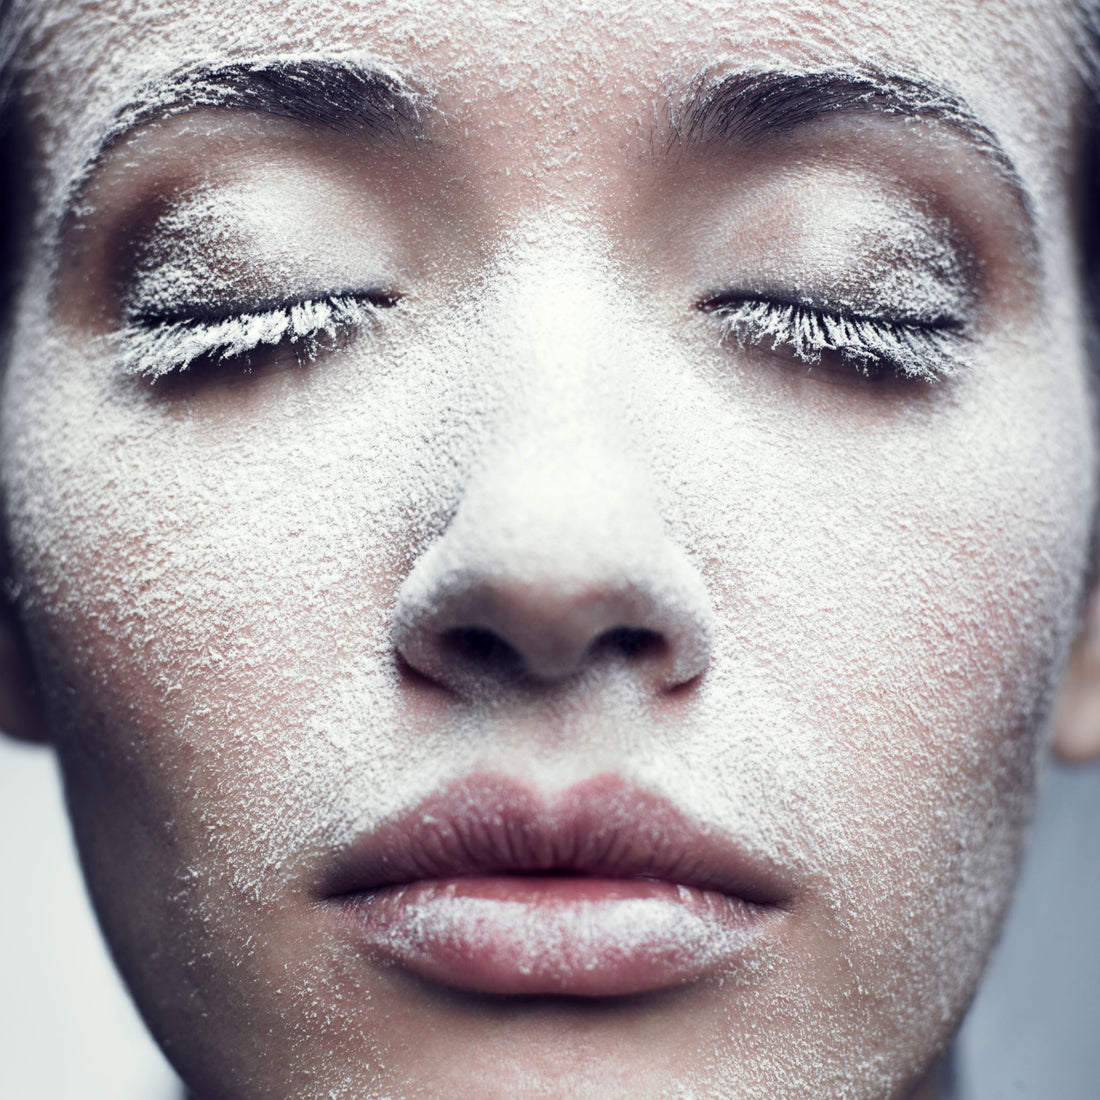 Facial skincare should keep your skin properly moisturized in winter.